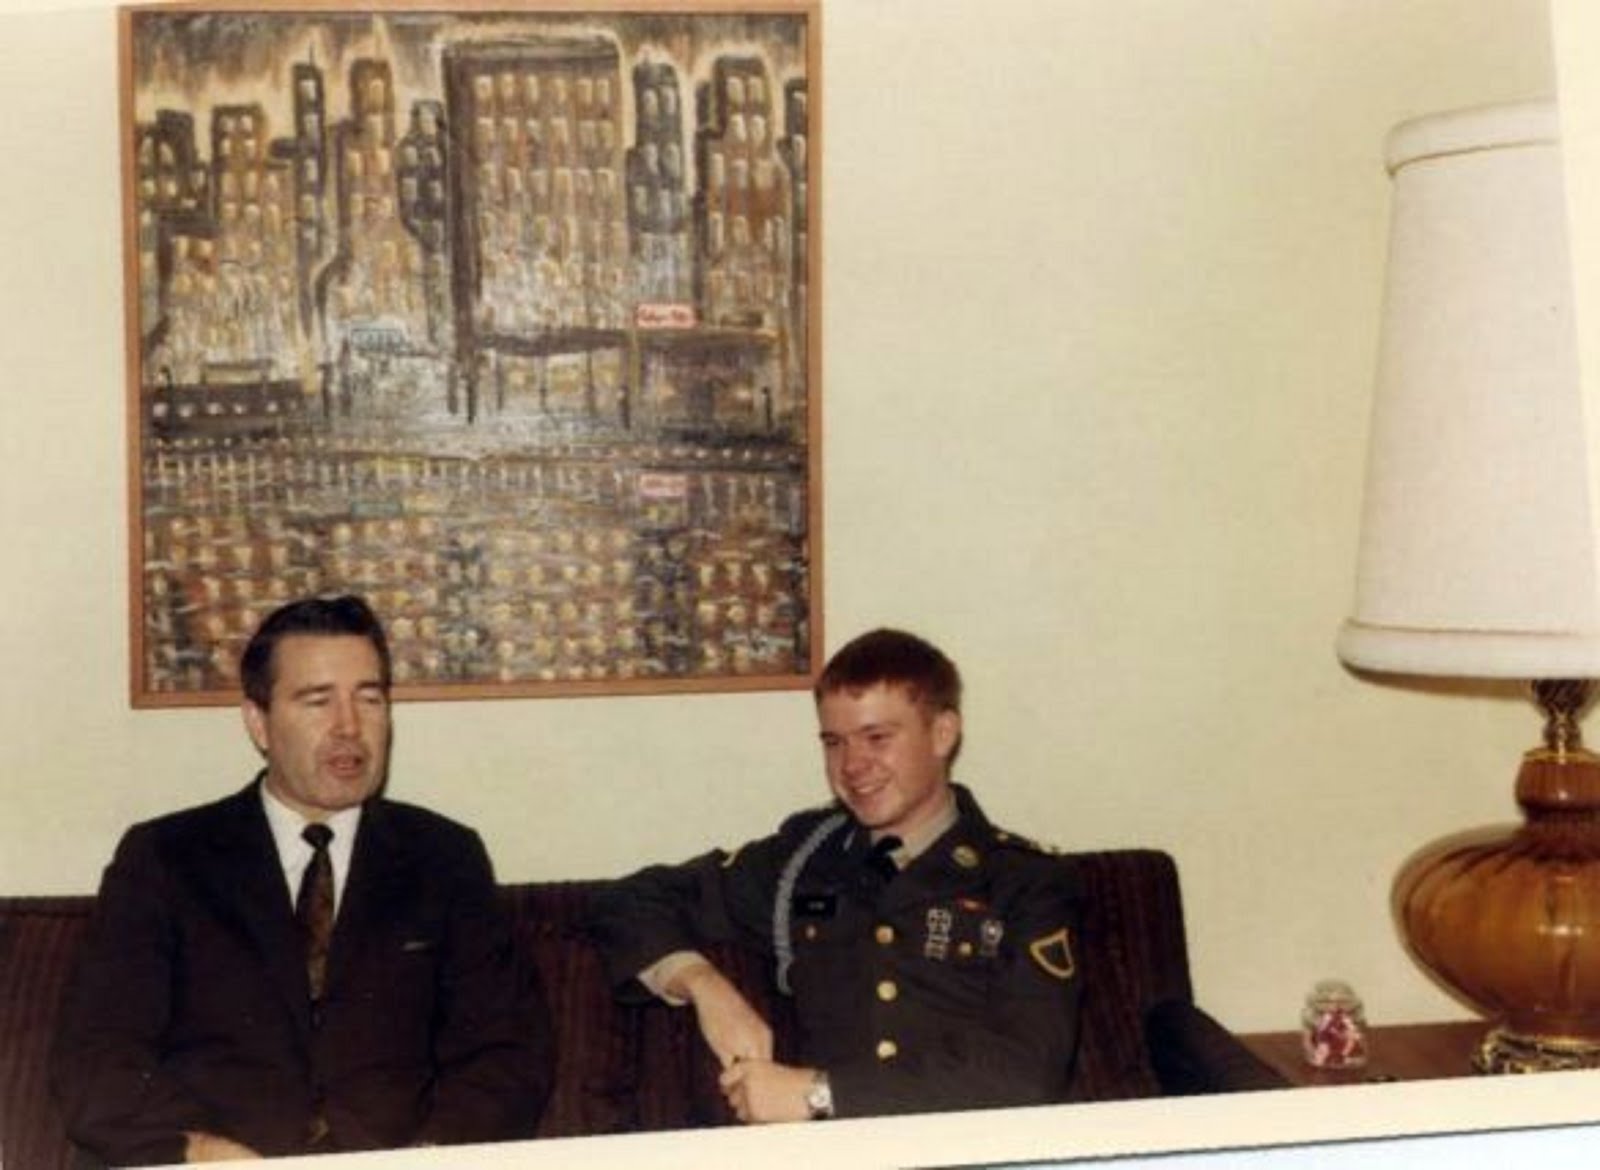 MY  DAD ZELMAR, AND ME IN UNIFORM READY TO GO TO VIETNAM THAT NIGHT ON JAN 19th, 1969